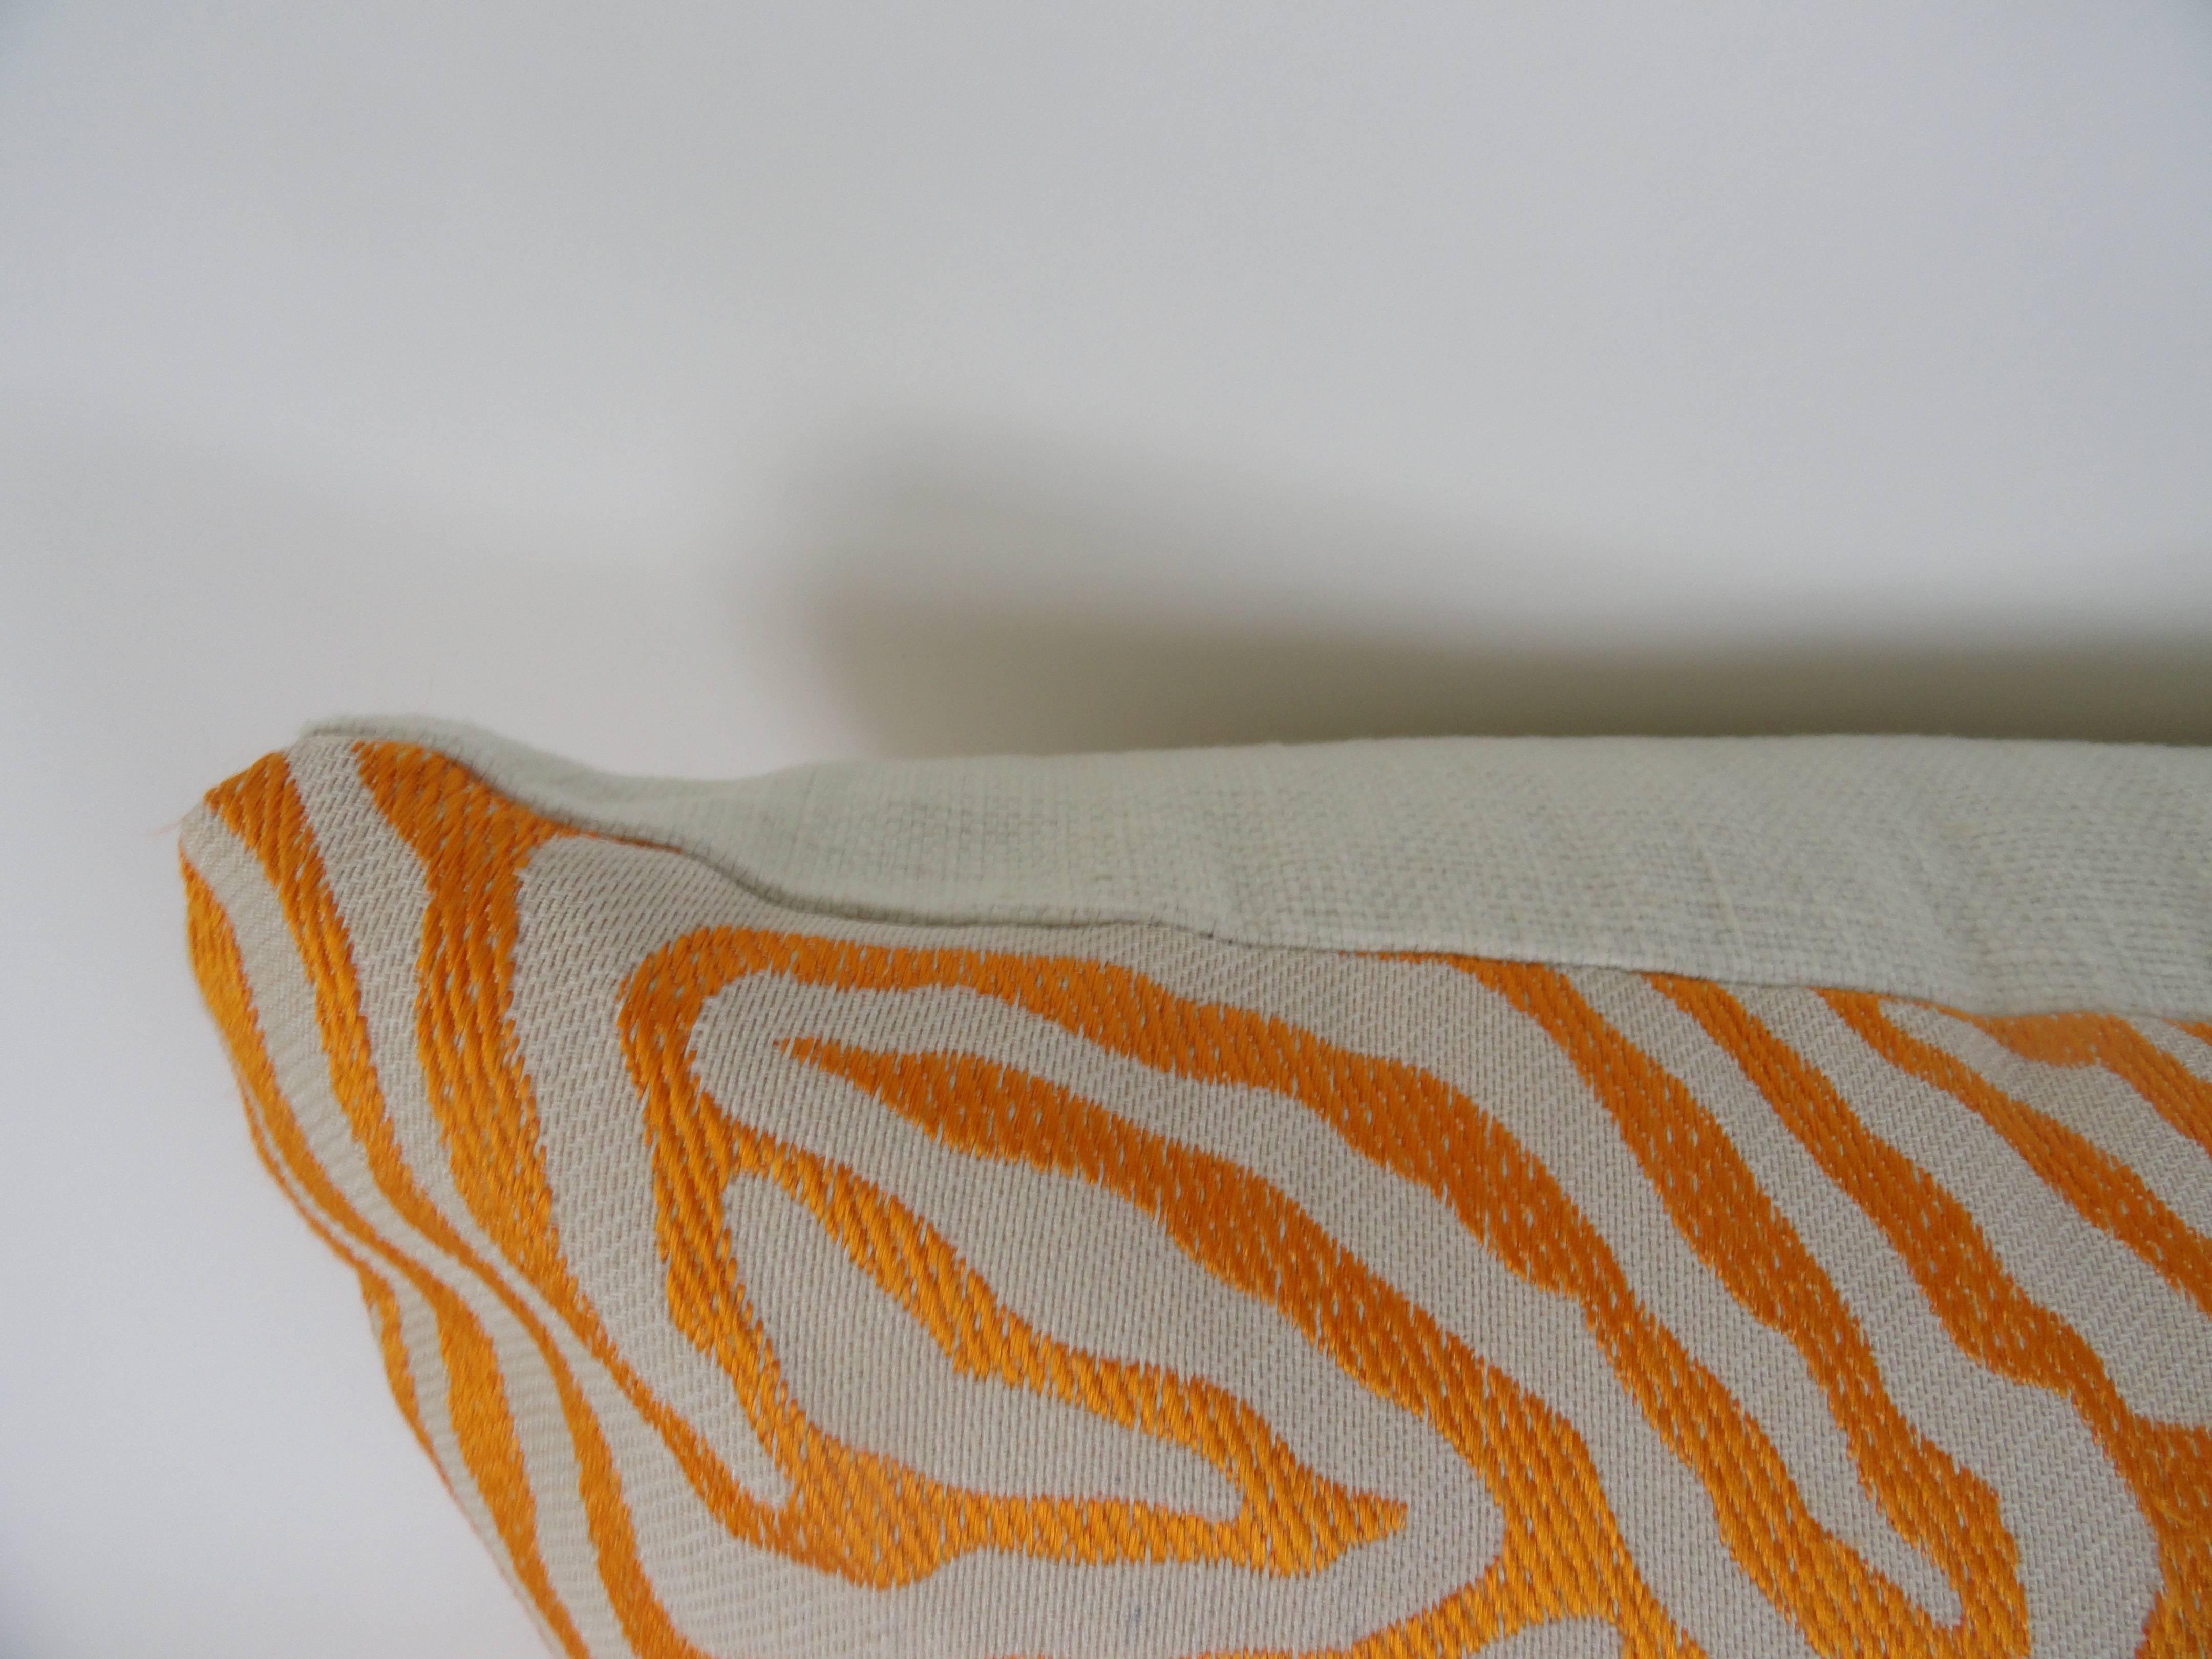 Pair of Orange Zebra Print Pillows In Excellent Condition For Sale In West Palm Beach, FL